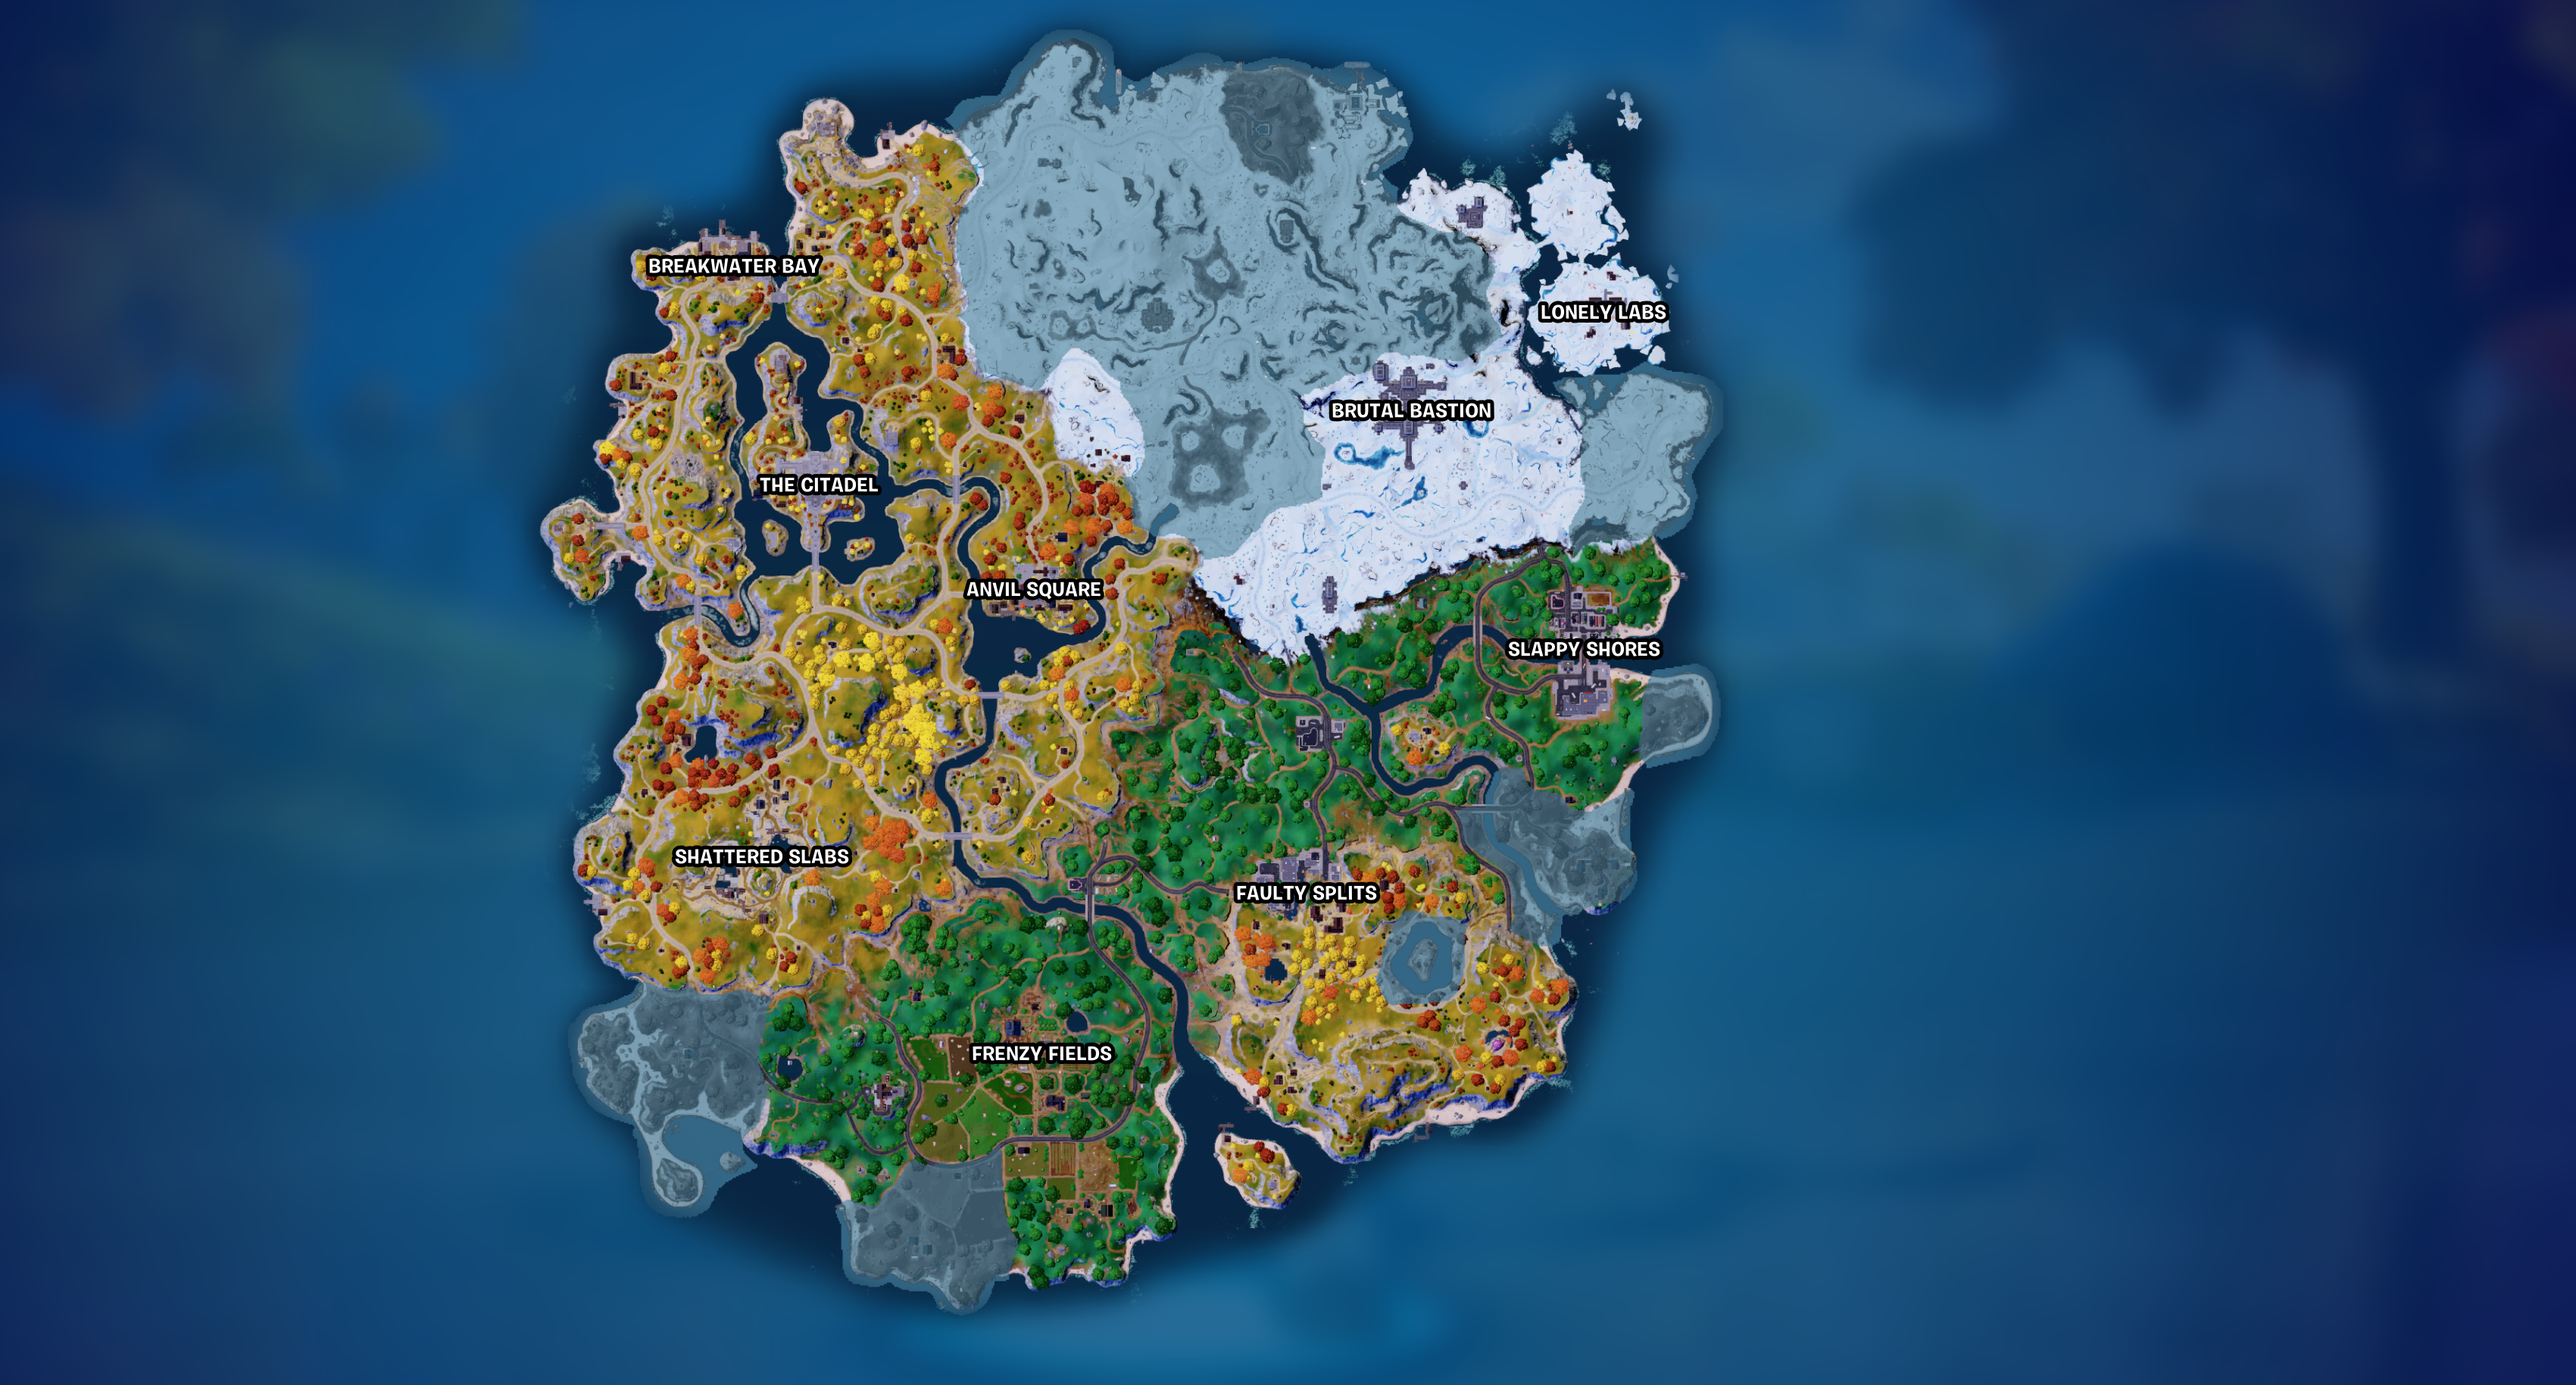 How To Find Everything For Fortnite's Week 12 Quests